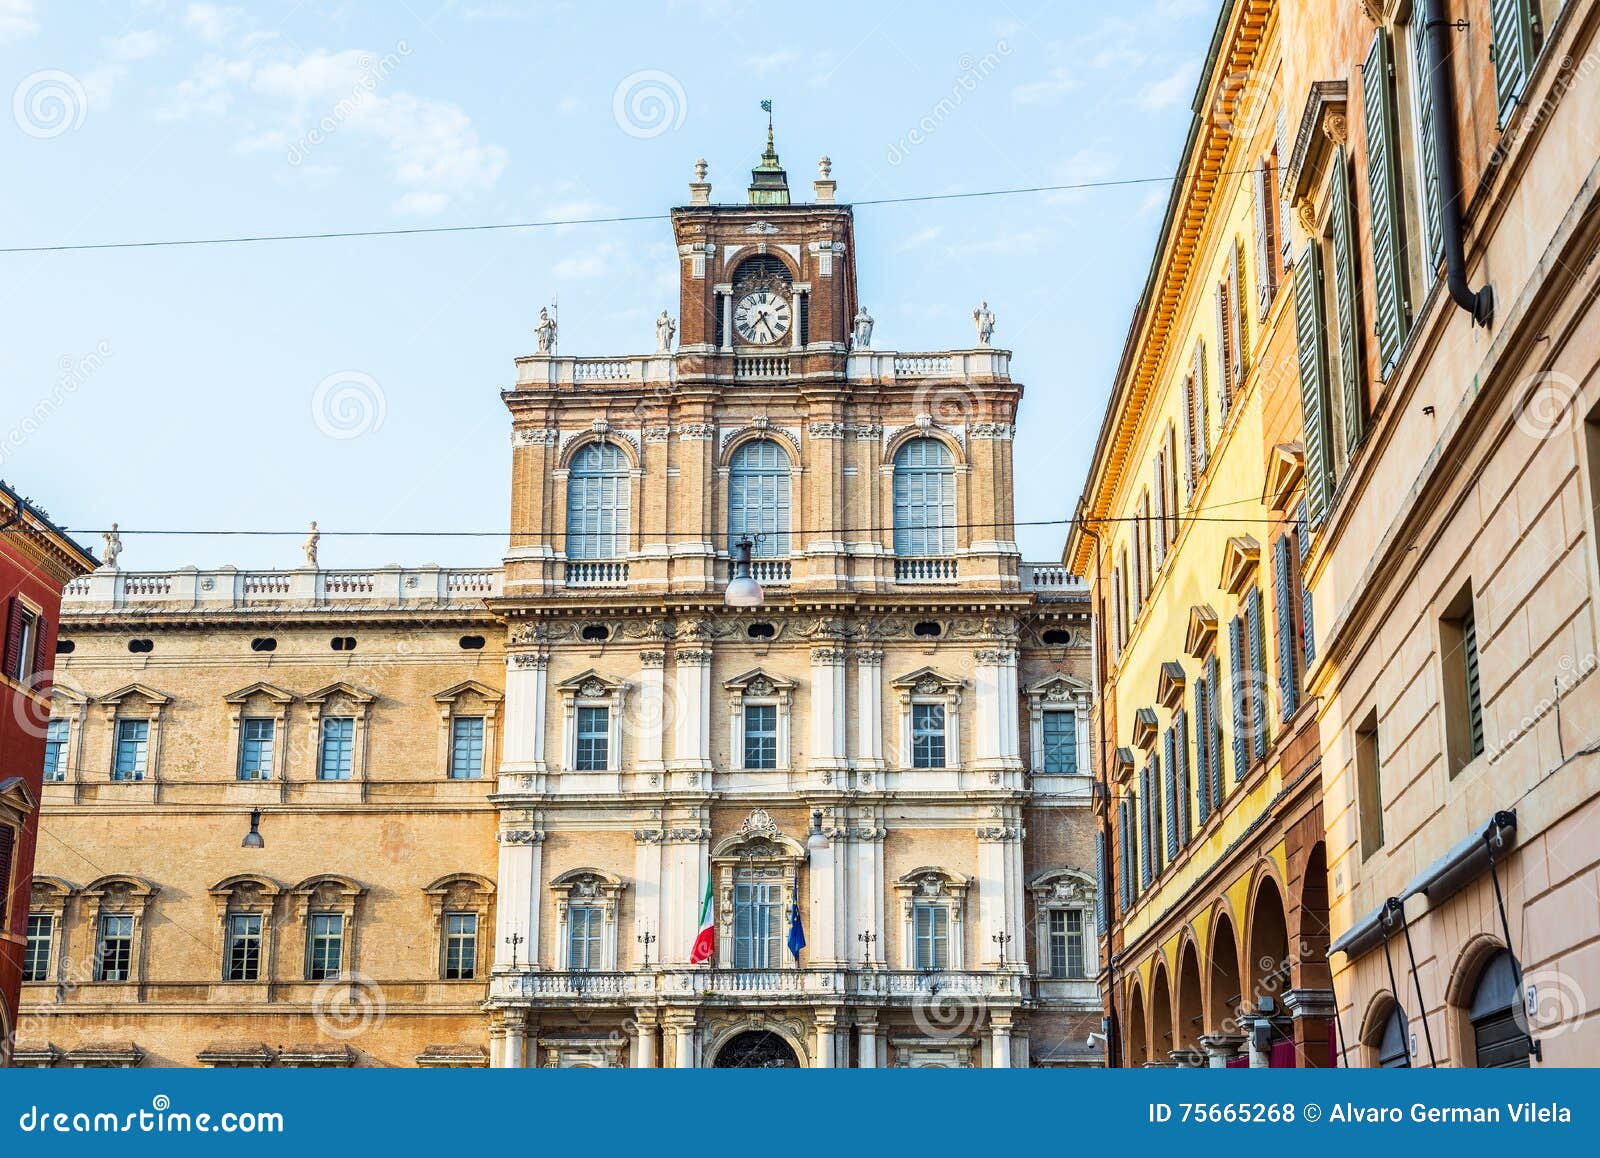 palazzo ducale in piazza roma of modena. italy.